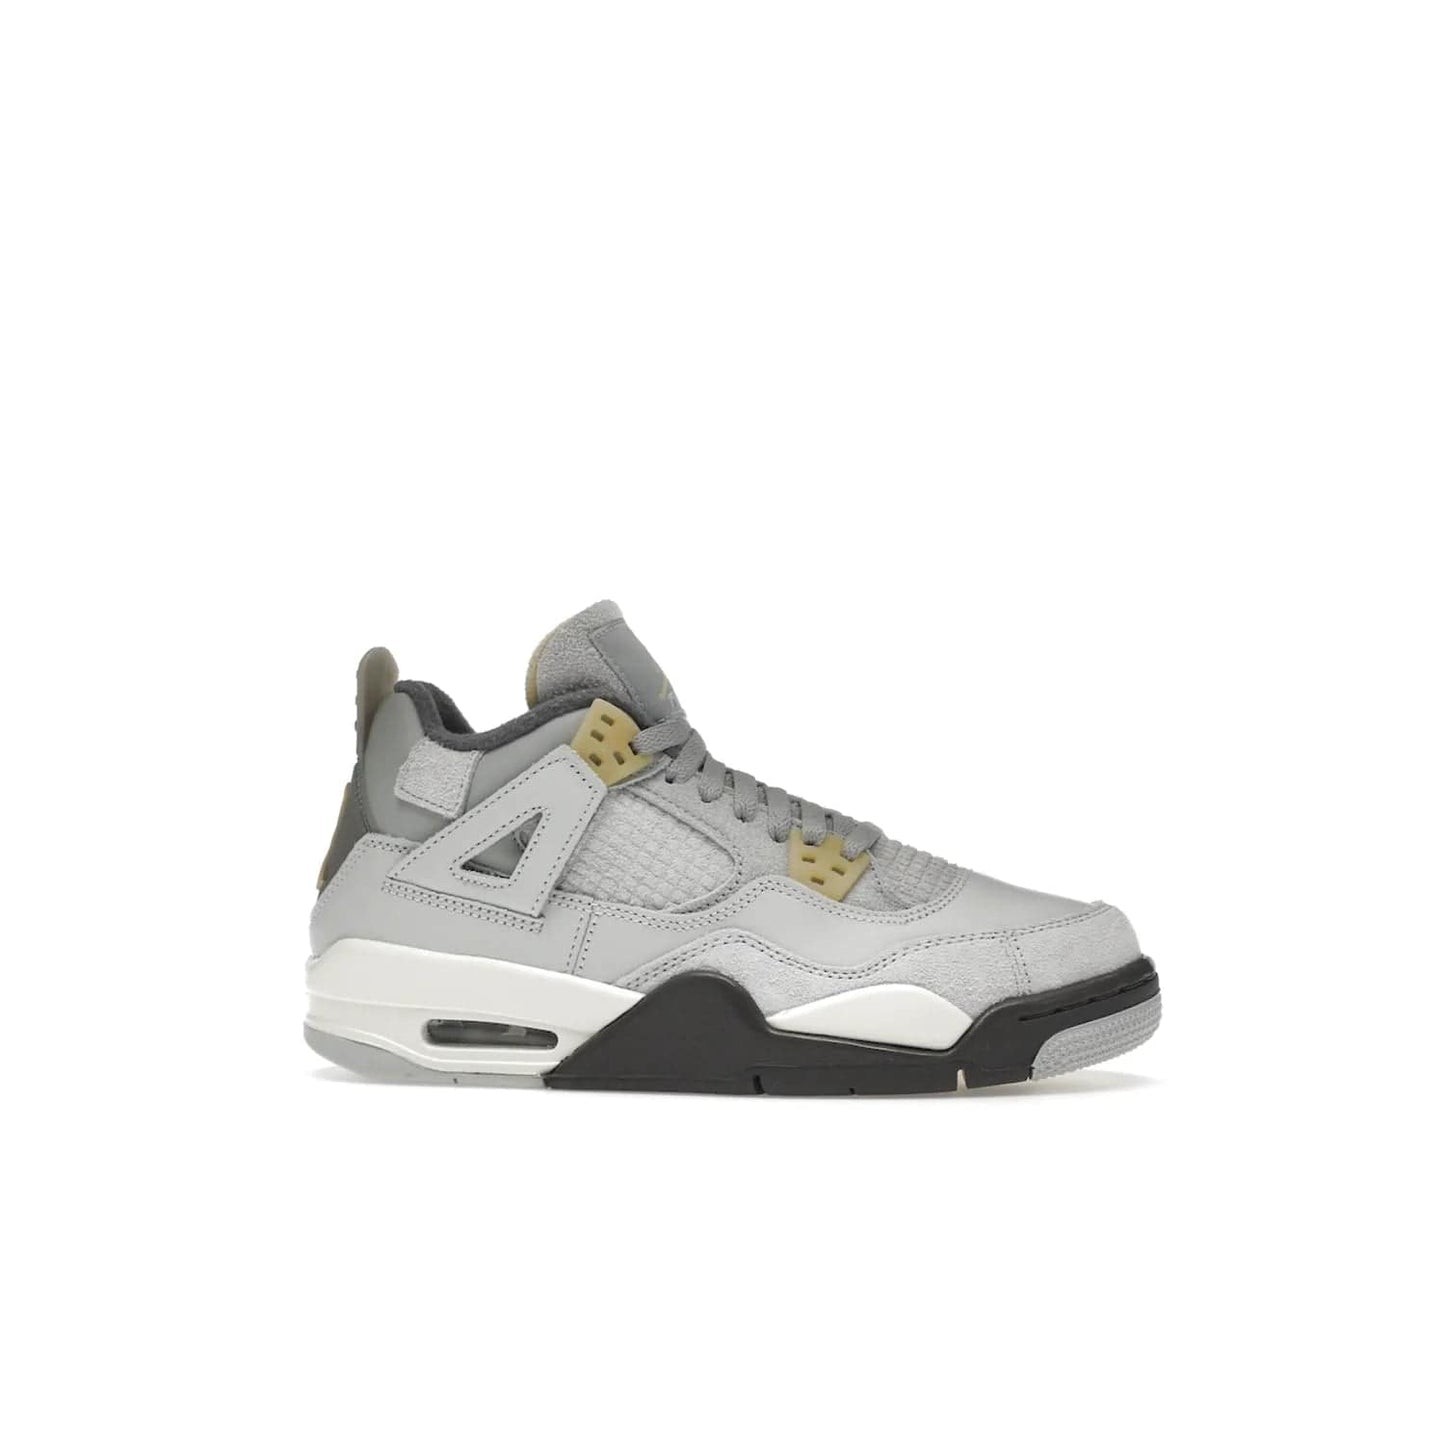 Jordan 4 Retro SE Craft Photon Dust (GS) - Image 2 - Only at www.BallersClubKickz.com - Shop the Jordan 4 Retro SE Craft Photon Dust (GS), the ultimate mix of style and comfort. With photonic dust, pale vanilla, off-white, grey fog, flat pewter and sail colorway, foam midsole, and rubber outsole, don't miss this special edition Jordan 4 releasing Feb 11, 2023.